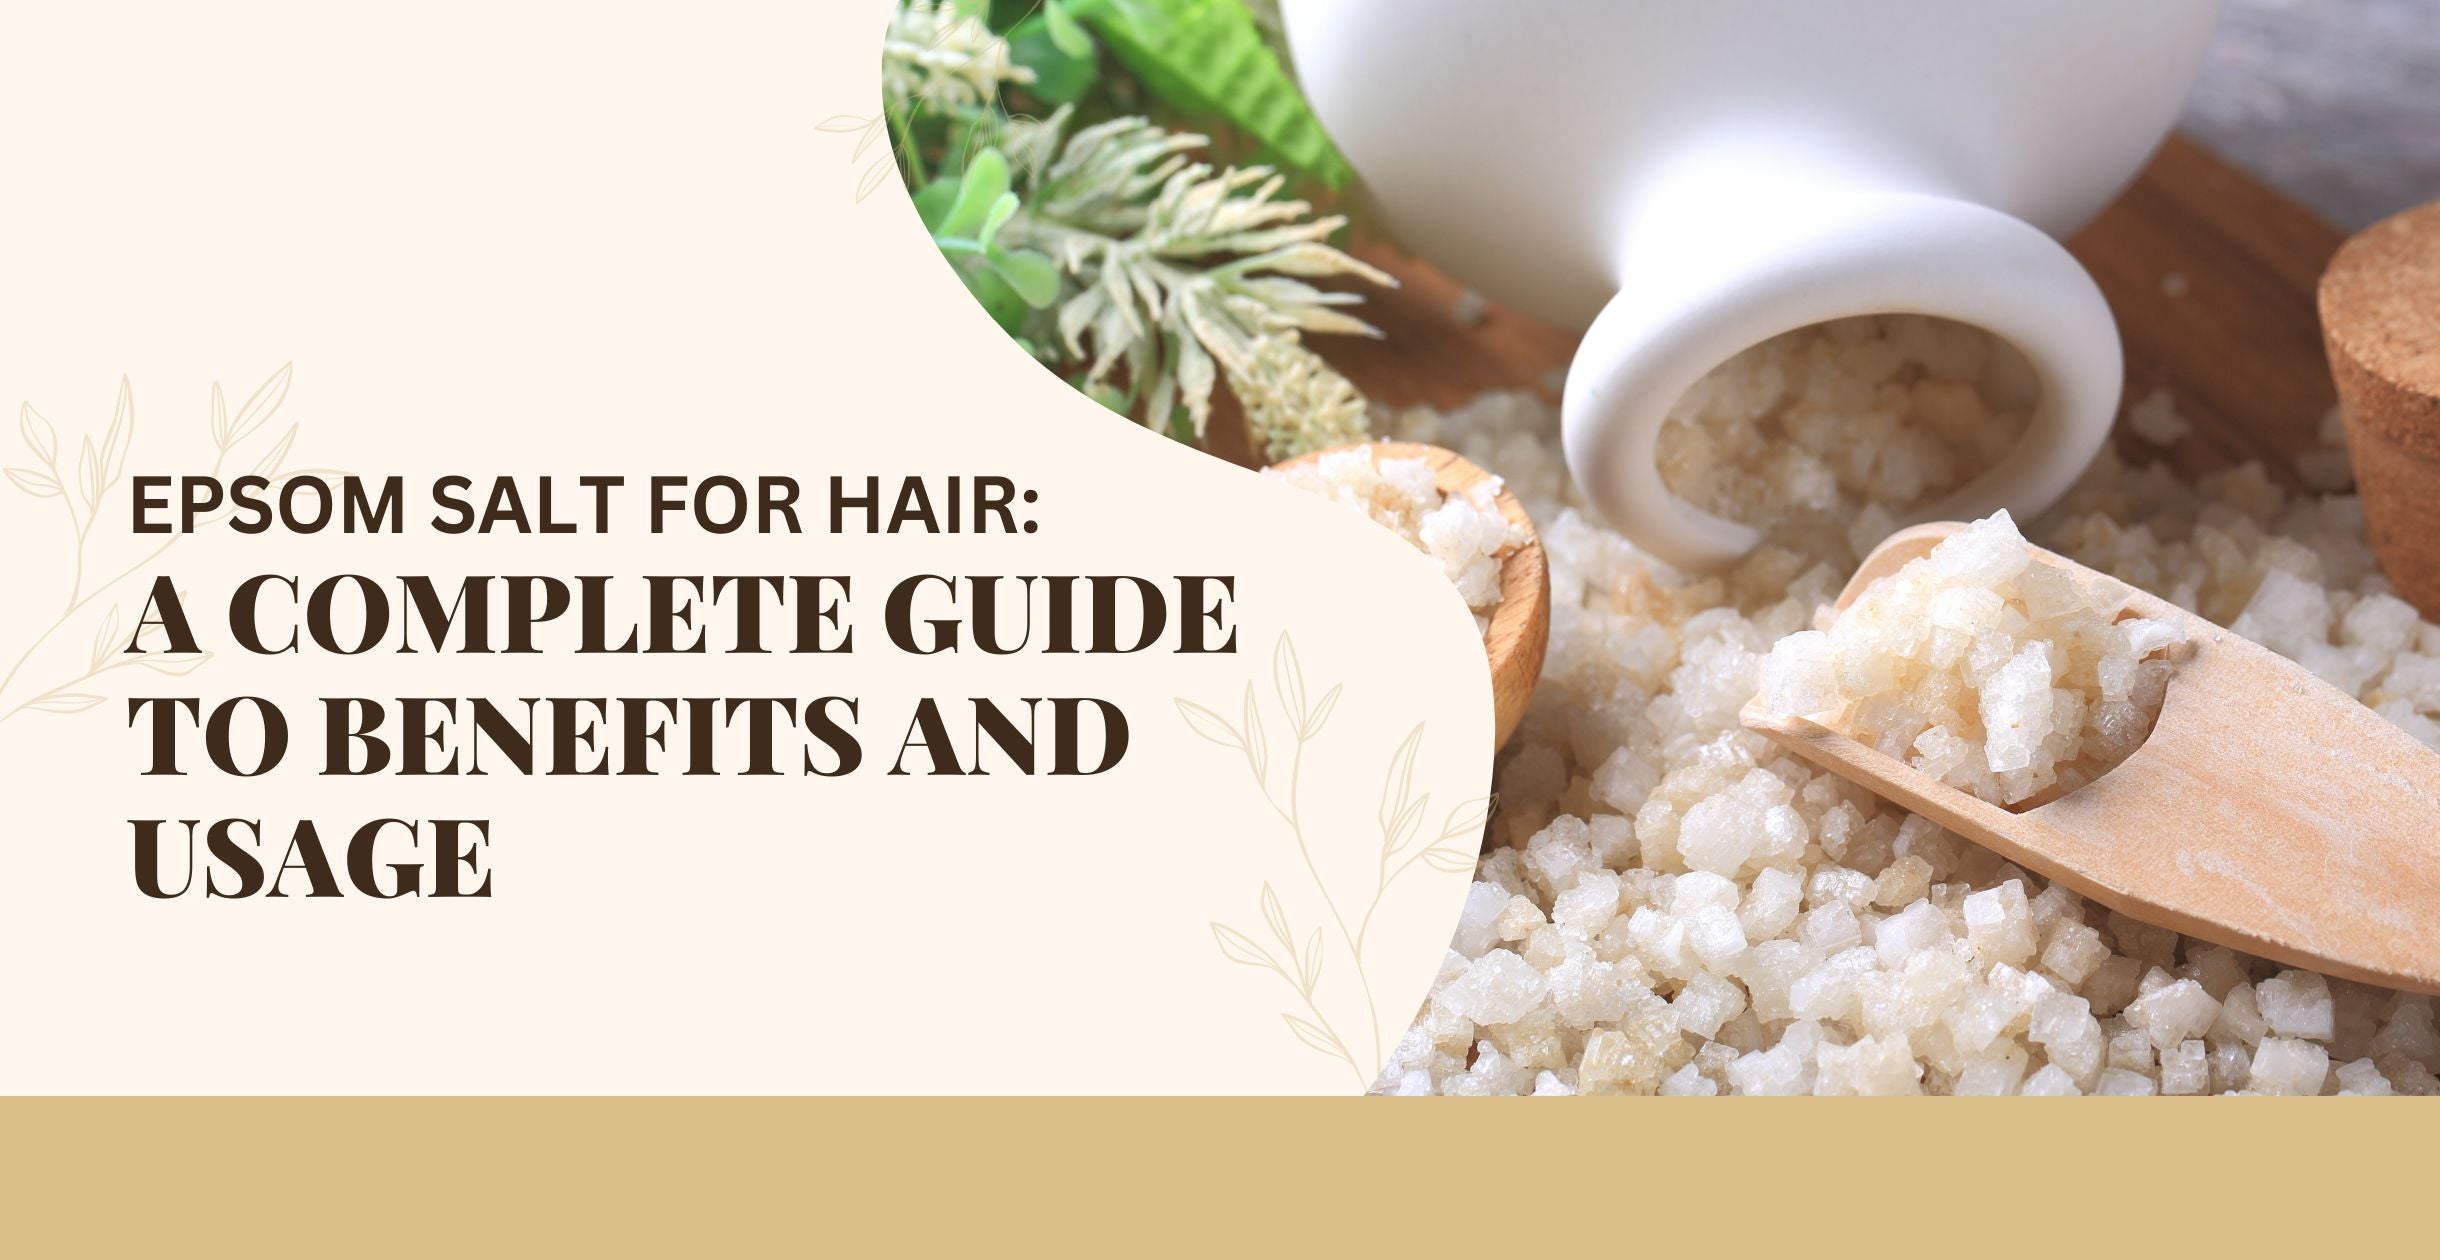 Epsom Salt for Hair: A Complete Guide to Benefits and Usage